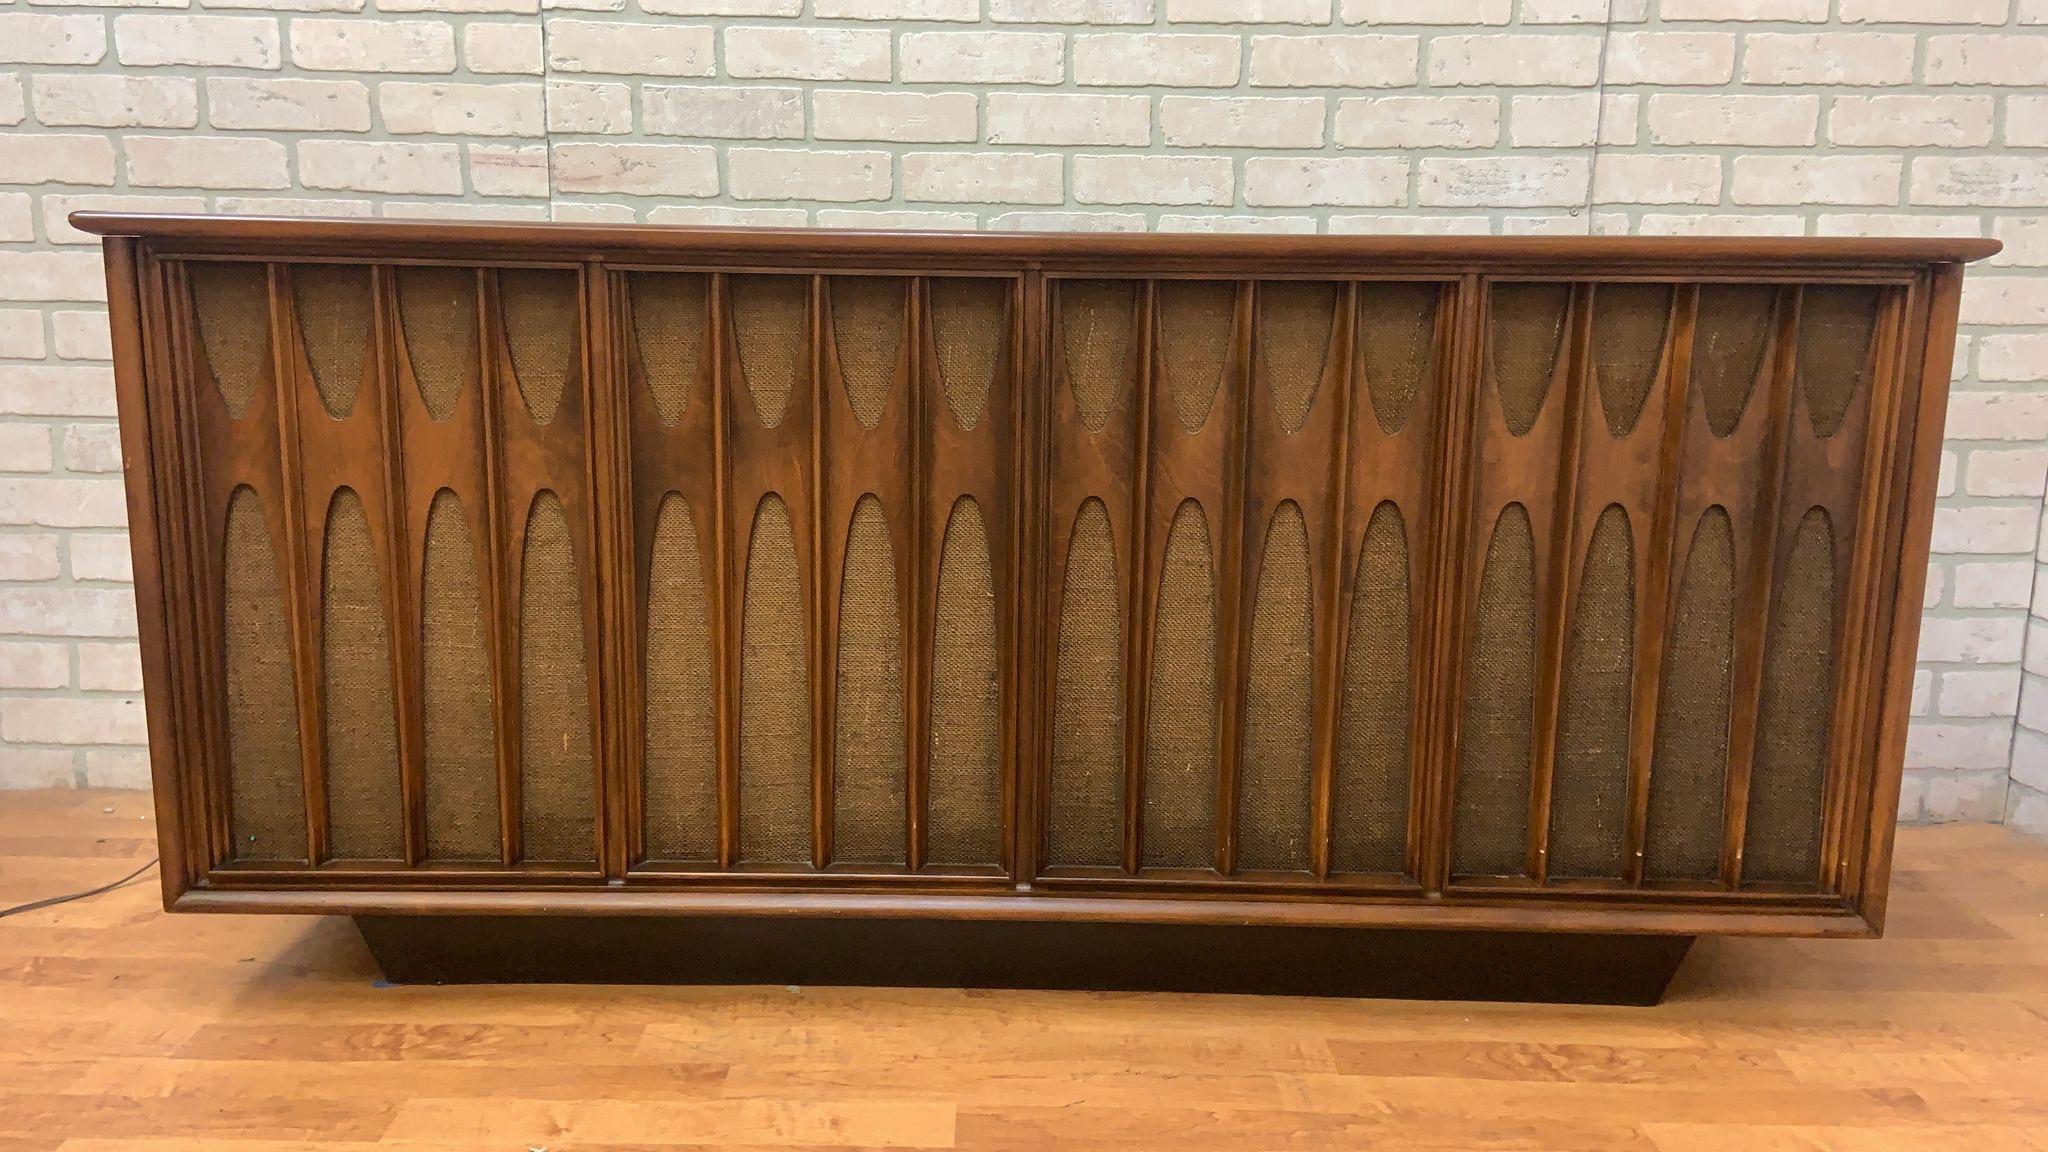 Mid Century Modern Broyhill Brasilia RCA Victor Victrola Stereo Console Credenza 

This beautiful AM/FM radio/record player is hand crafted and carved out of walnut. This is the perfect console piece for your mid century modern home. This RCA Victor